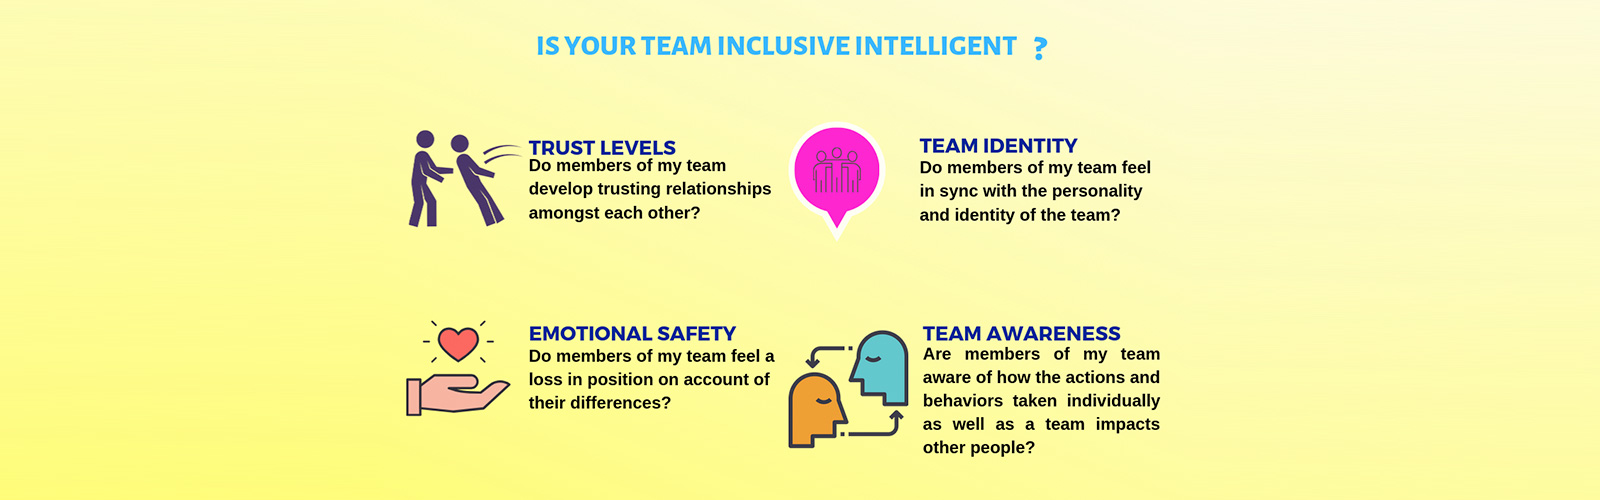 is your team inclusive intelligent